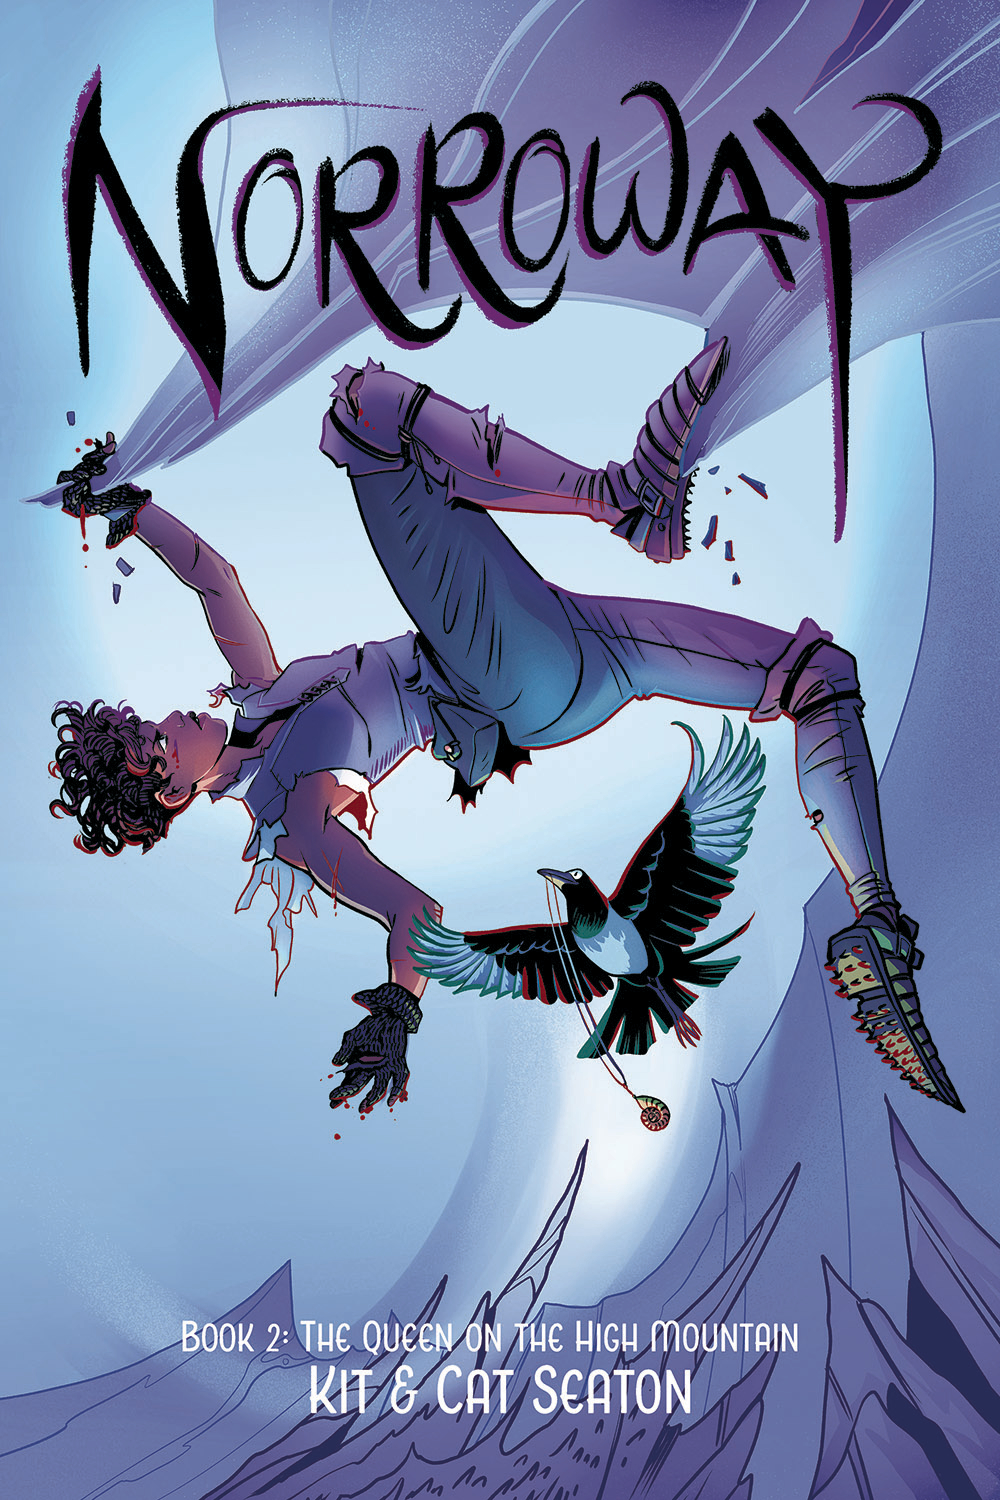 Norroway Graphic Novel Book 2 Queen On High Mountain